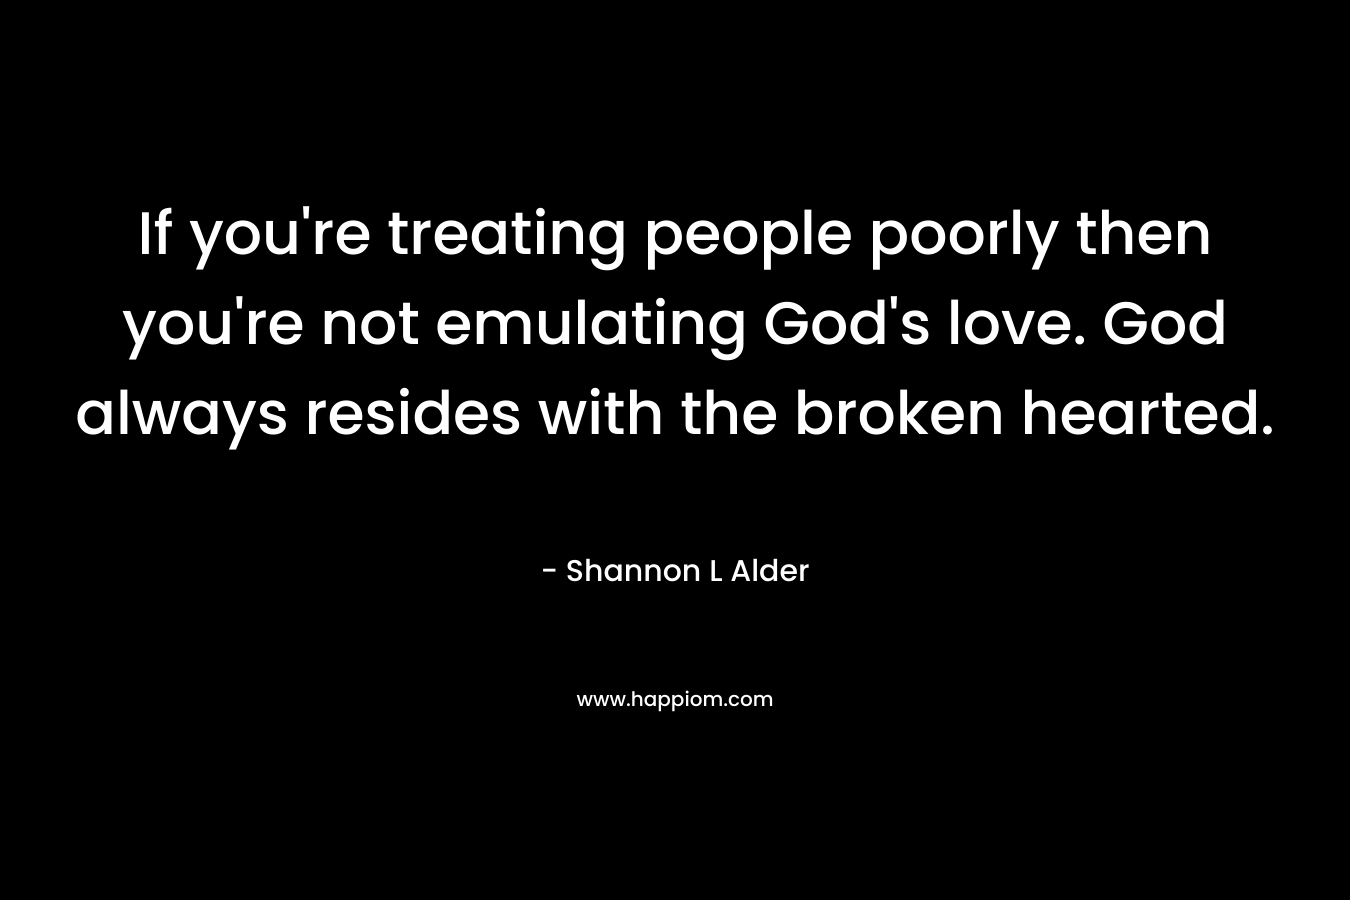 If you’re treating people poorly then you’re not emulating God’s love. God always resides with the broken hearted. – Shannon L Alder